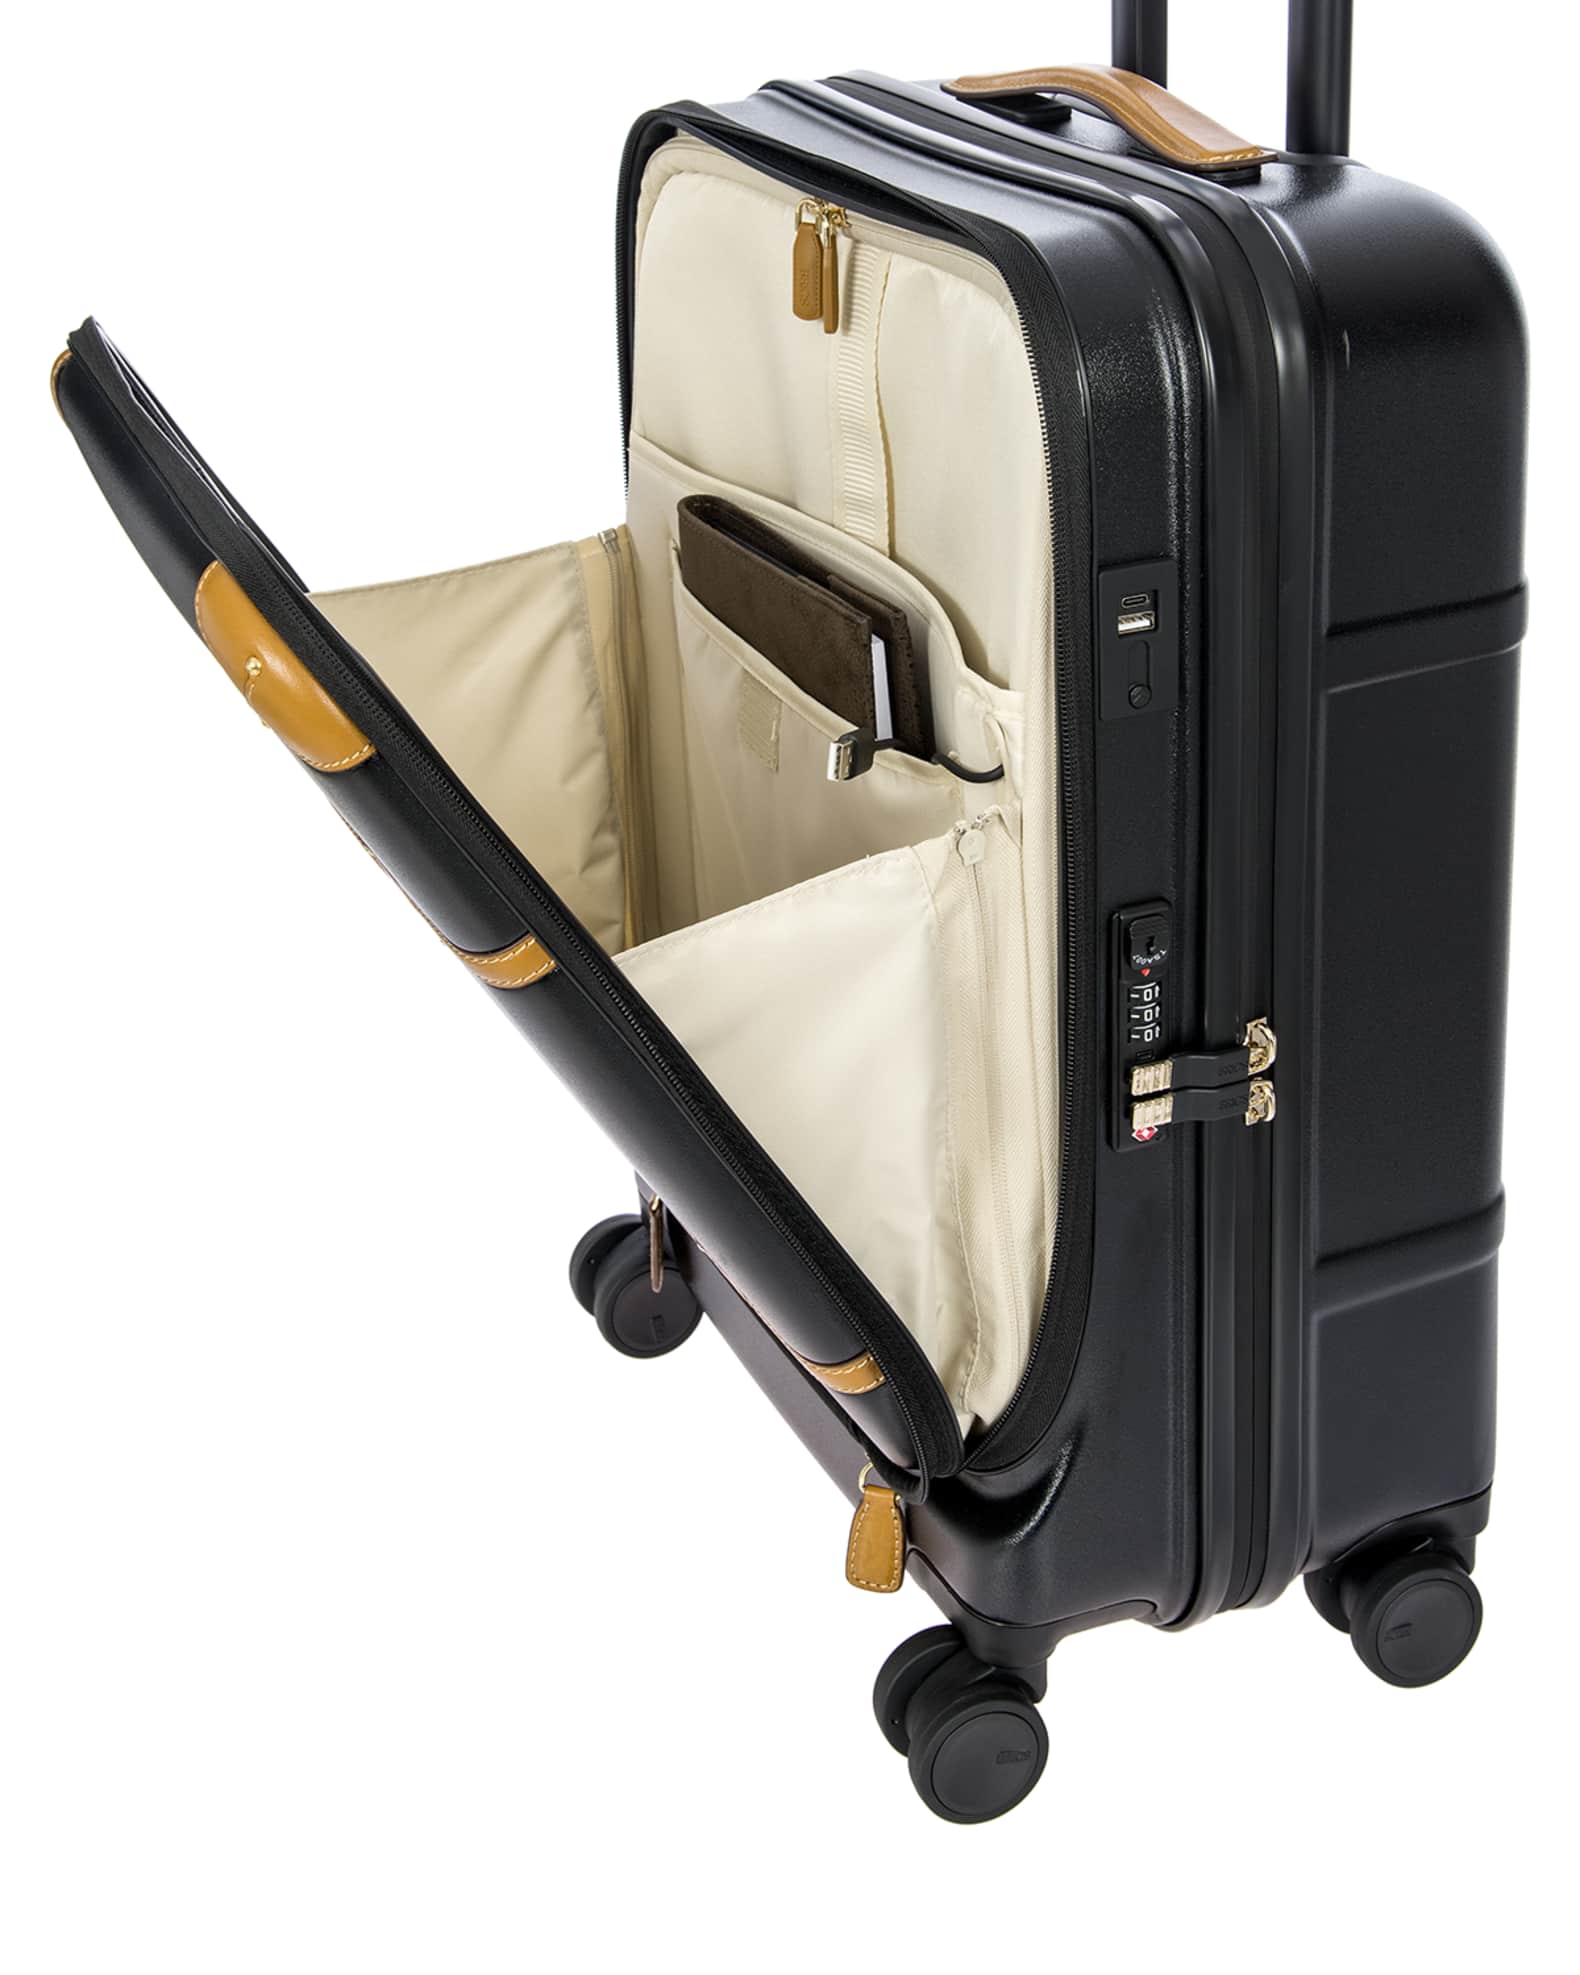 Black Bellagio Carryon Spinner Luggage with gold details